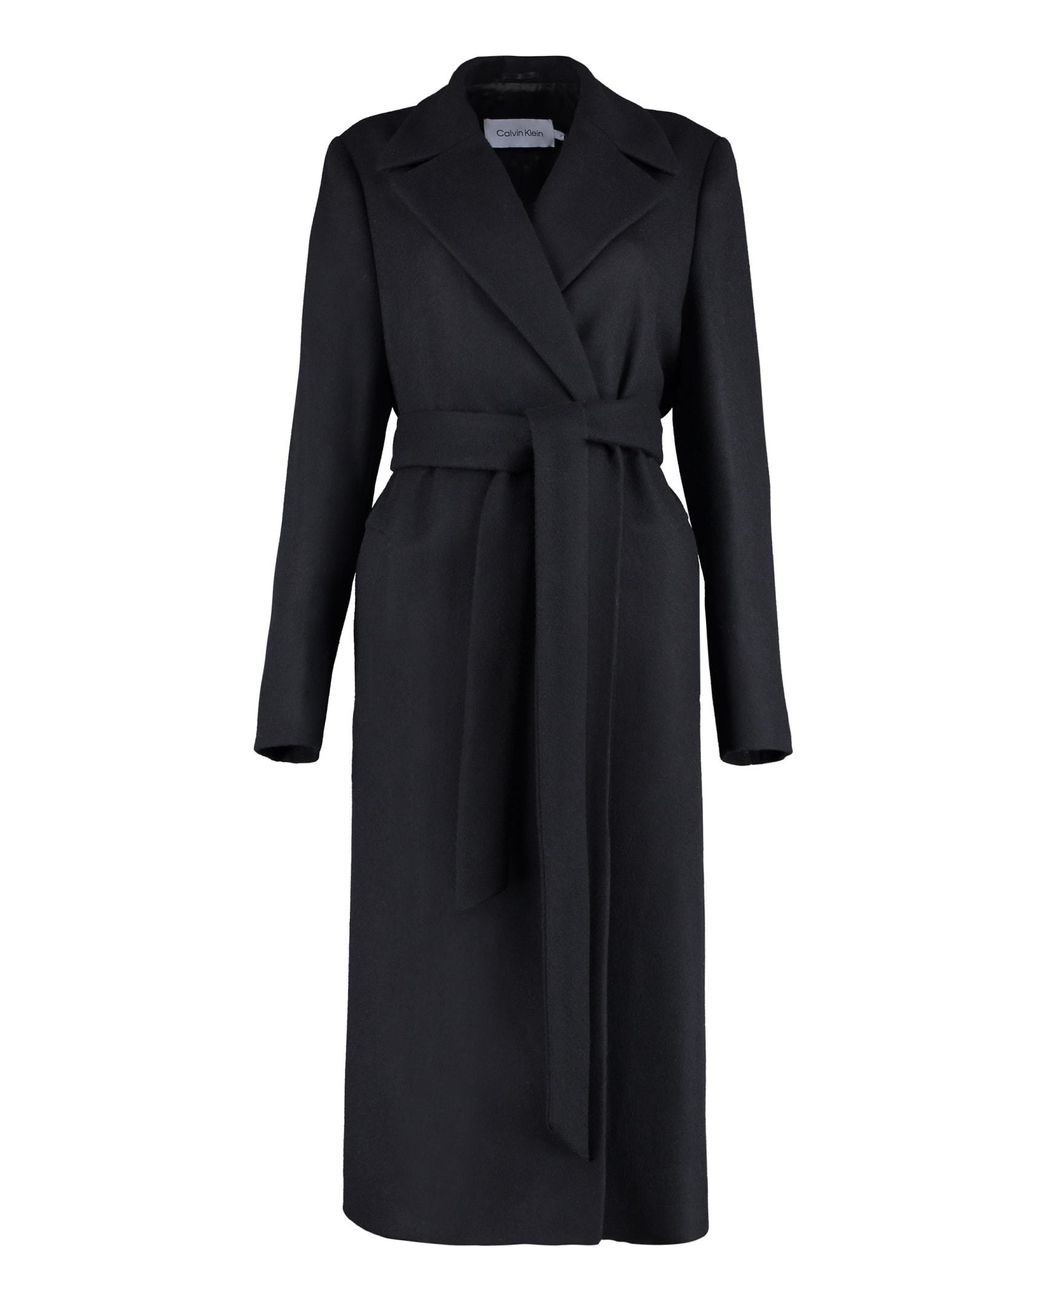 Calvin Klein Wool And Cashmere Coat in Black | Lyst